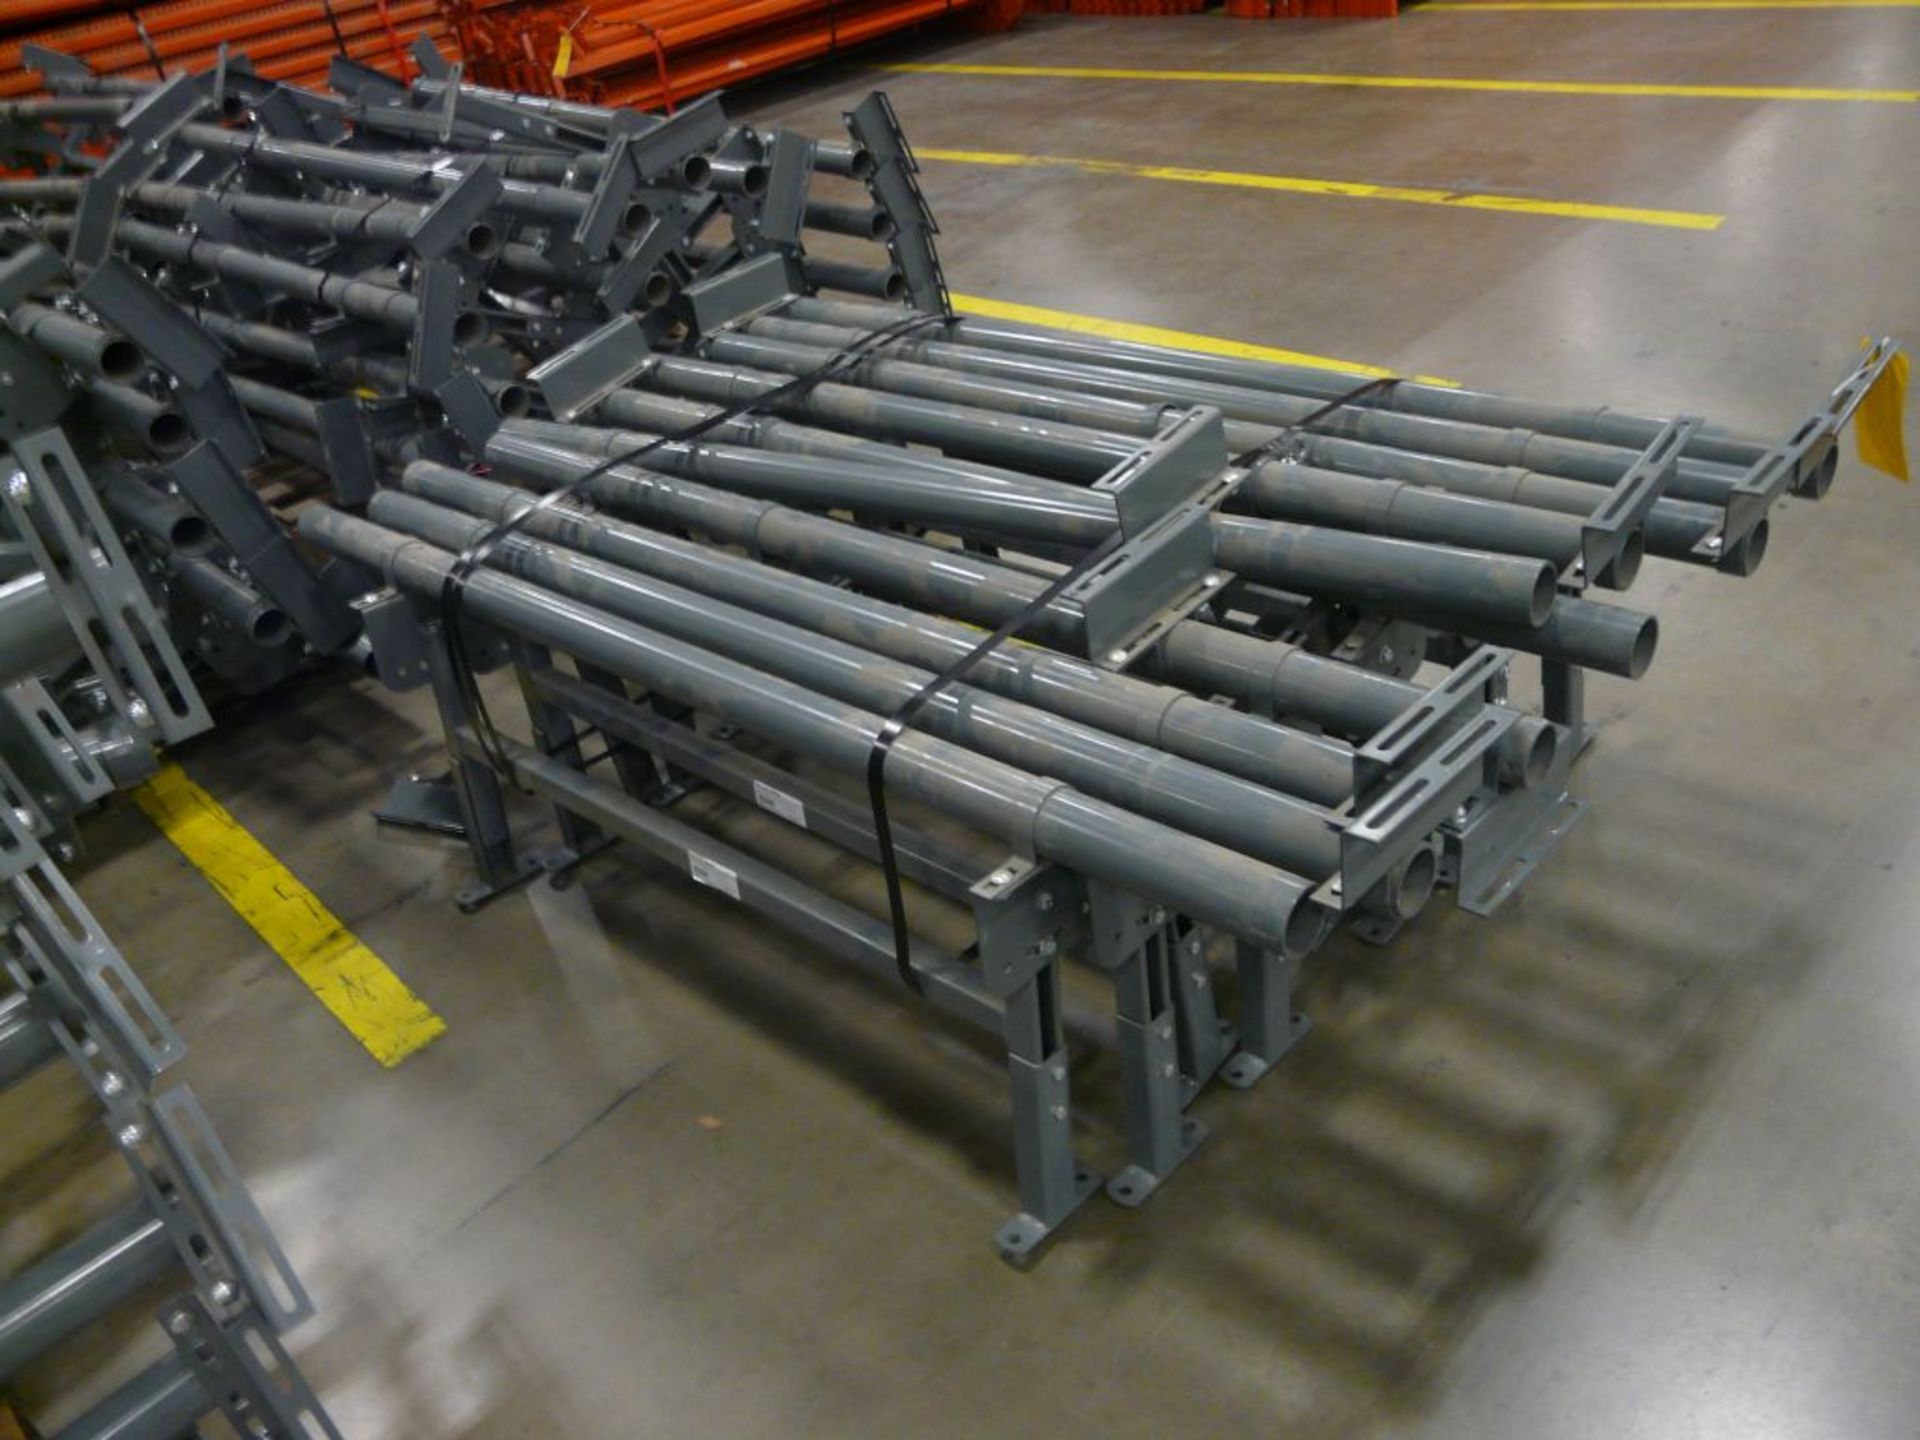 Lot of (10) USA Floor Supports - Brace: 71"L; Stand: 44"L x 19"H; Tag: 223858 - $30 Lot Loading Fee